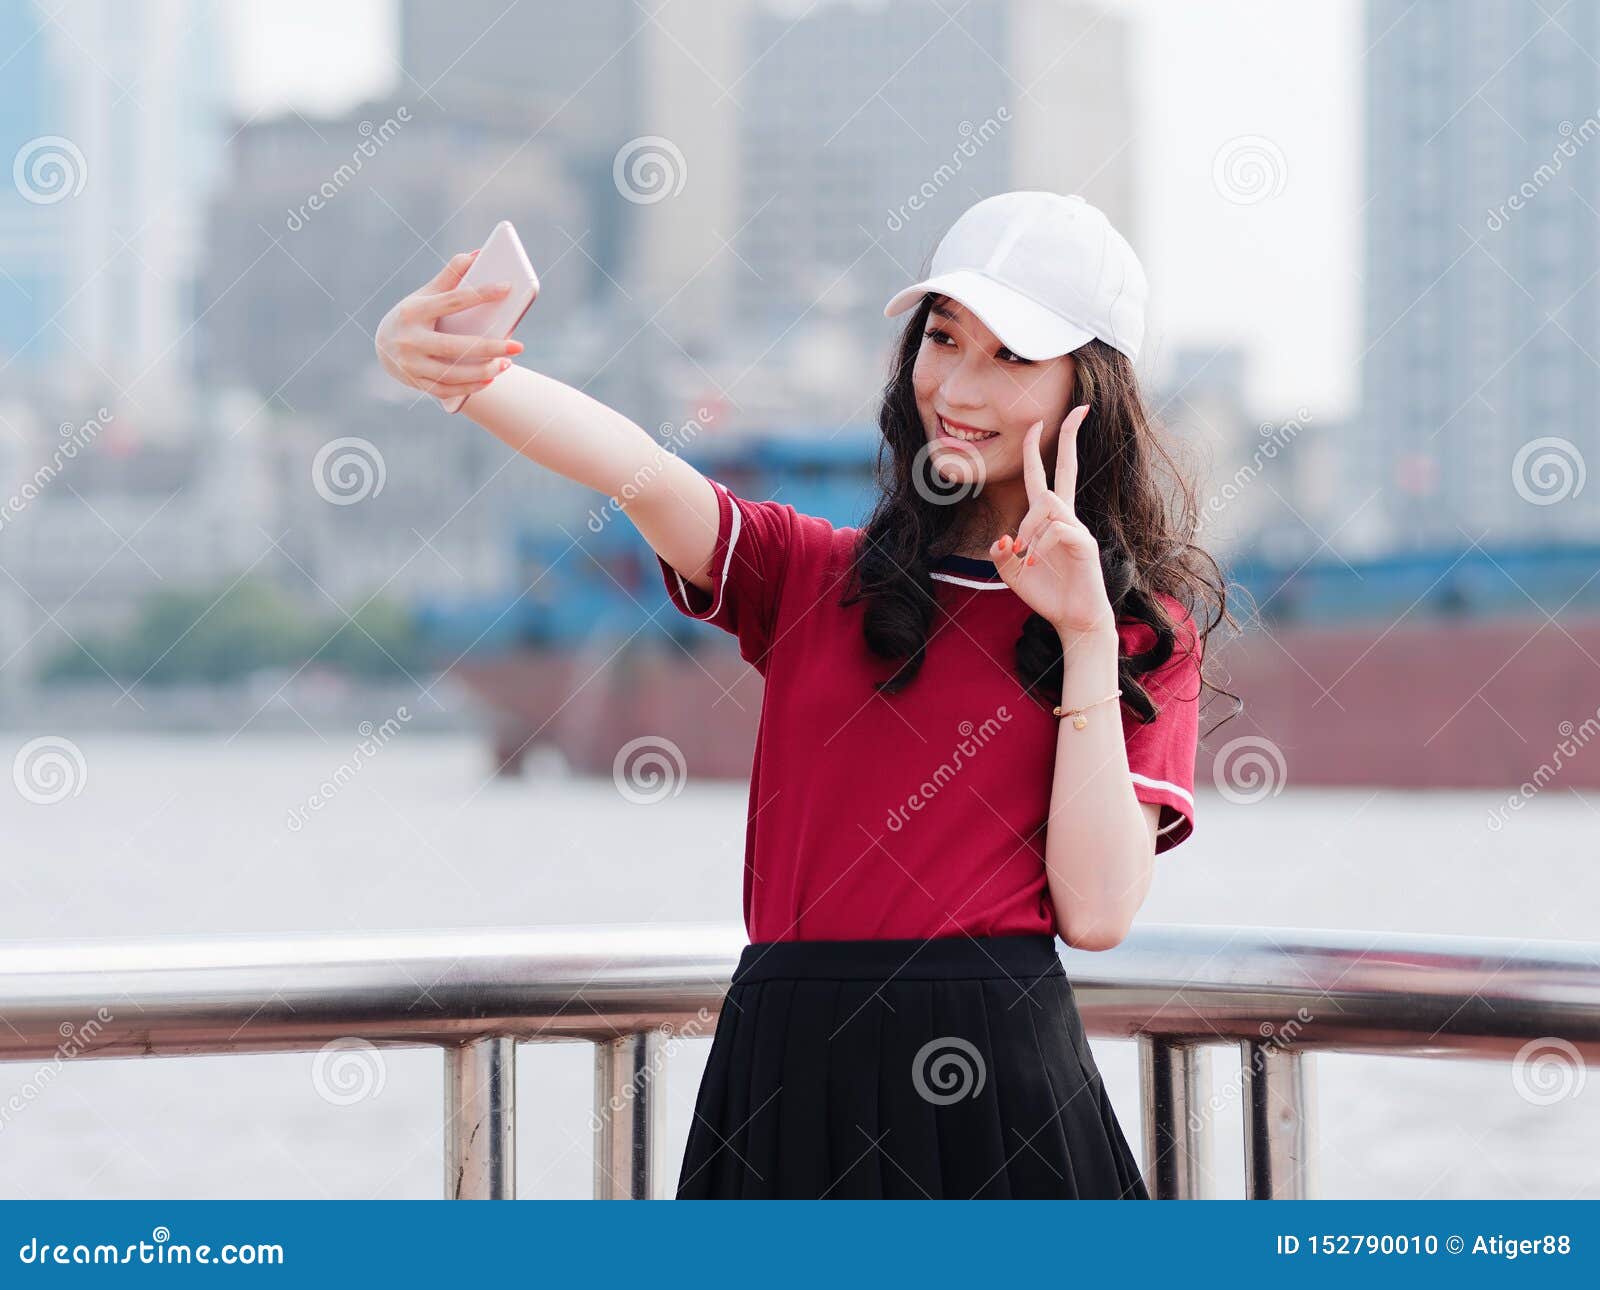 Premium Photo | Cool posing for selfies in the city center. a young bright cute  girl in a white knitted suit and a blue headband takes a selfie. duck lip  pose. fashion